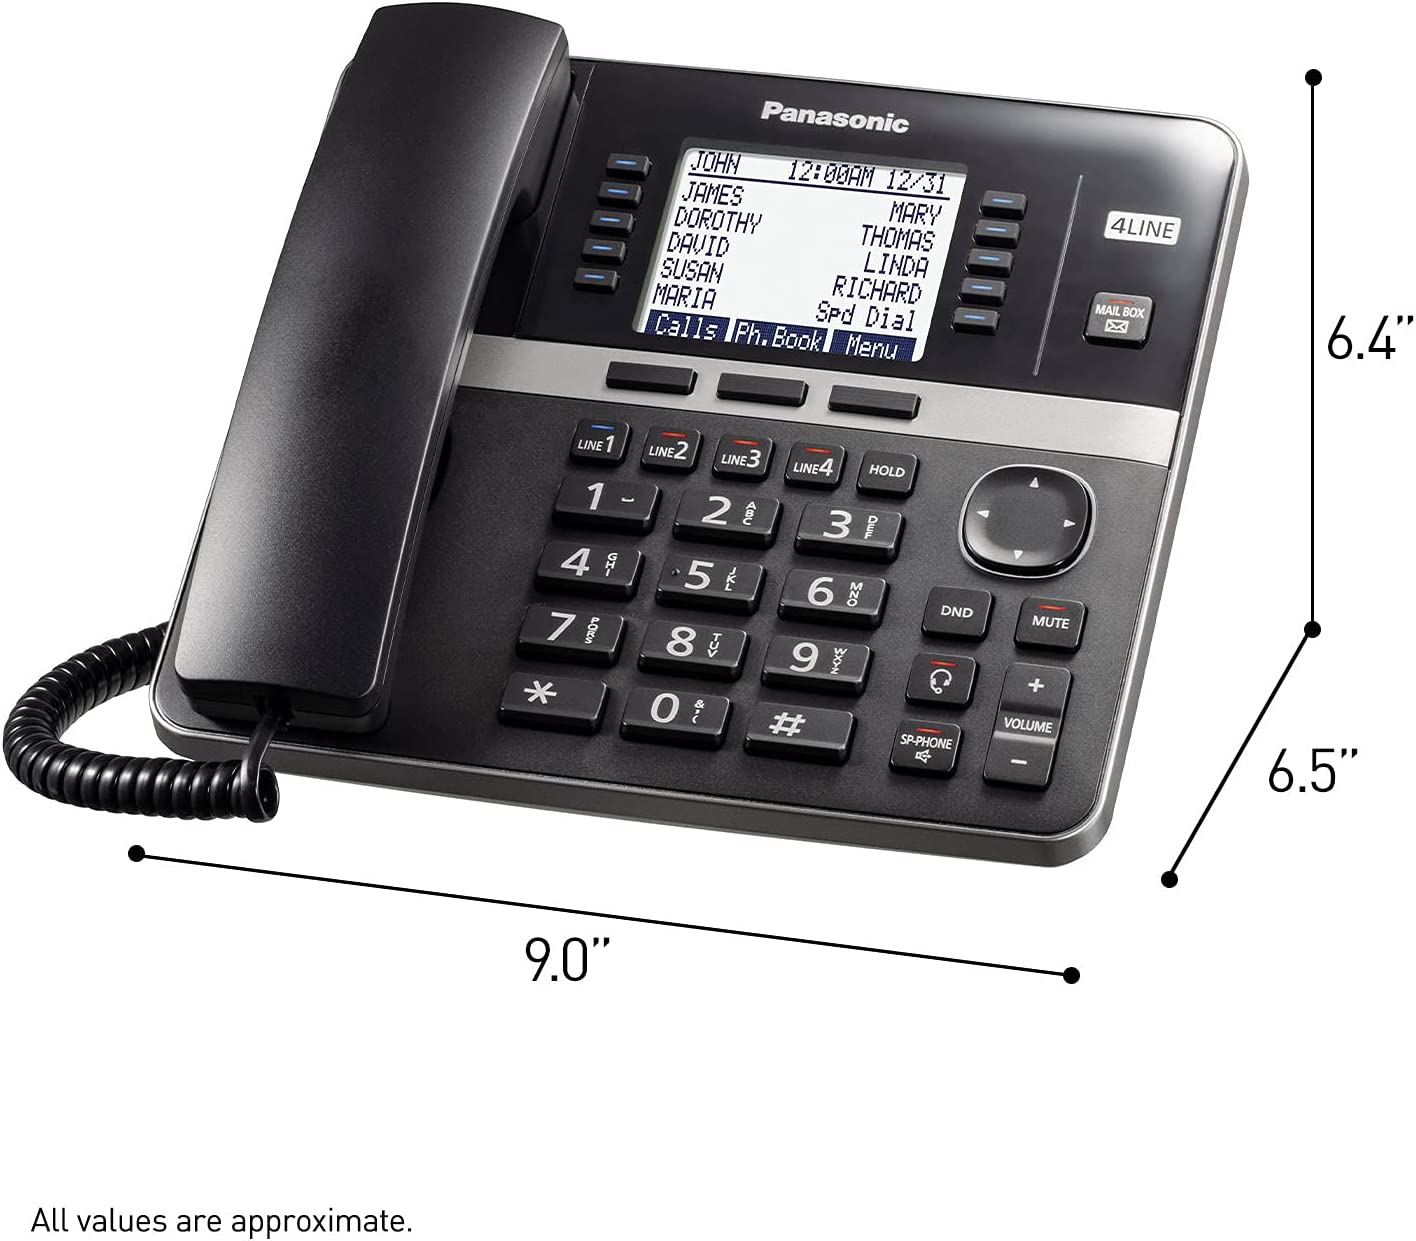 Panasonic Office Phone, Expandable 4-Line Desk Phone for Small and Medium Business, Corded Phone Base Station Expandable Up to 10 Business Phones Wirelessly - KX-TGW420B (Black)